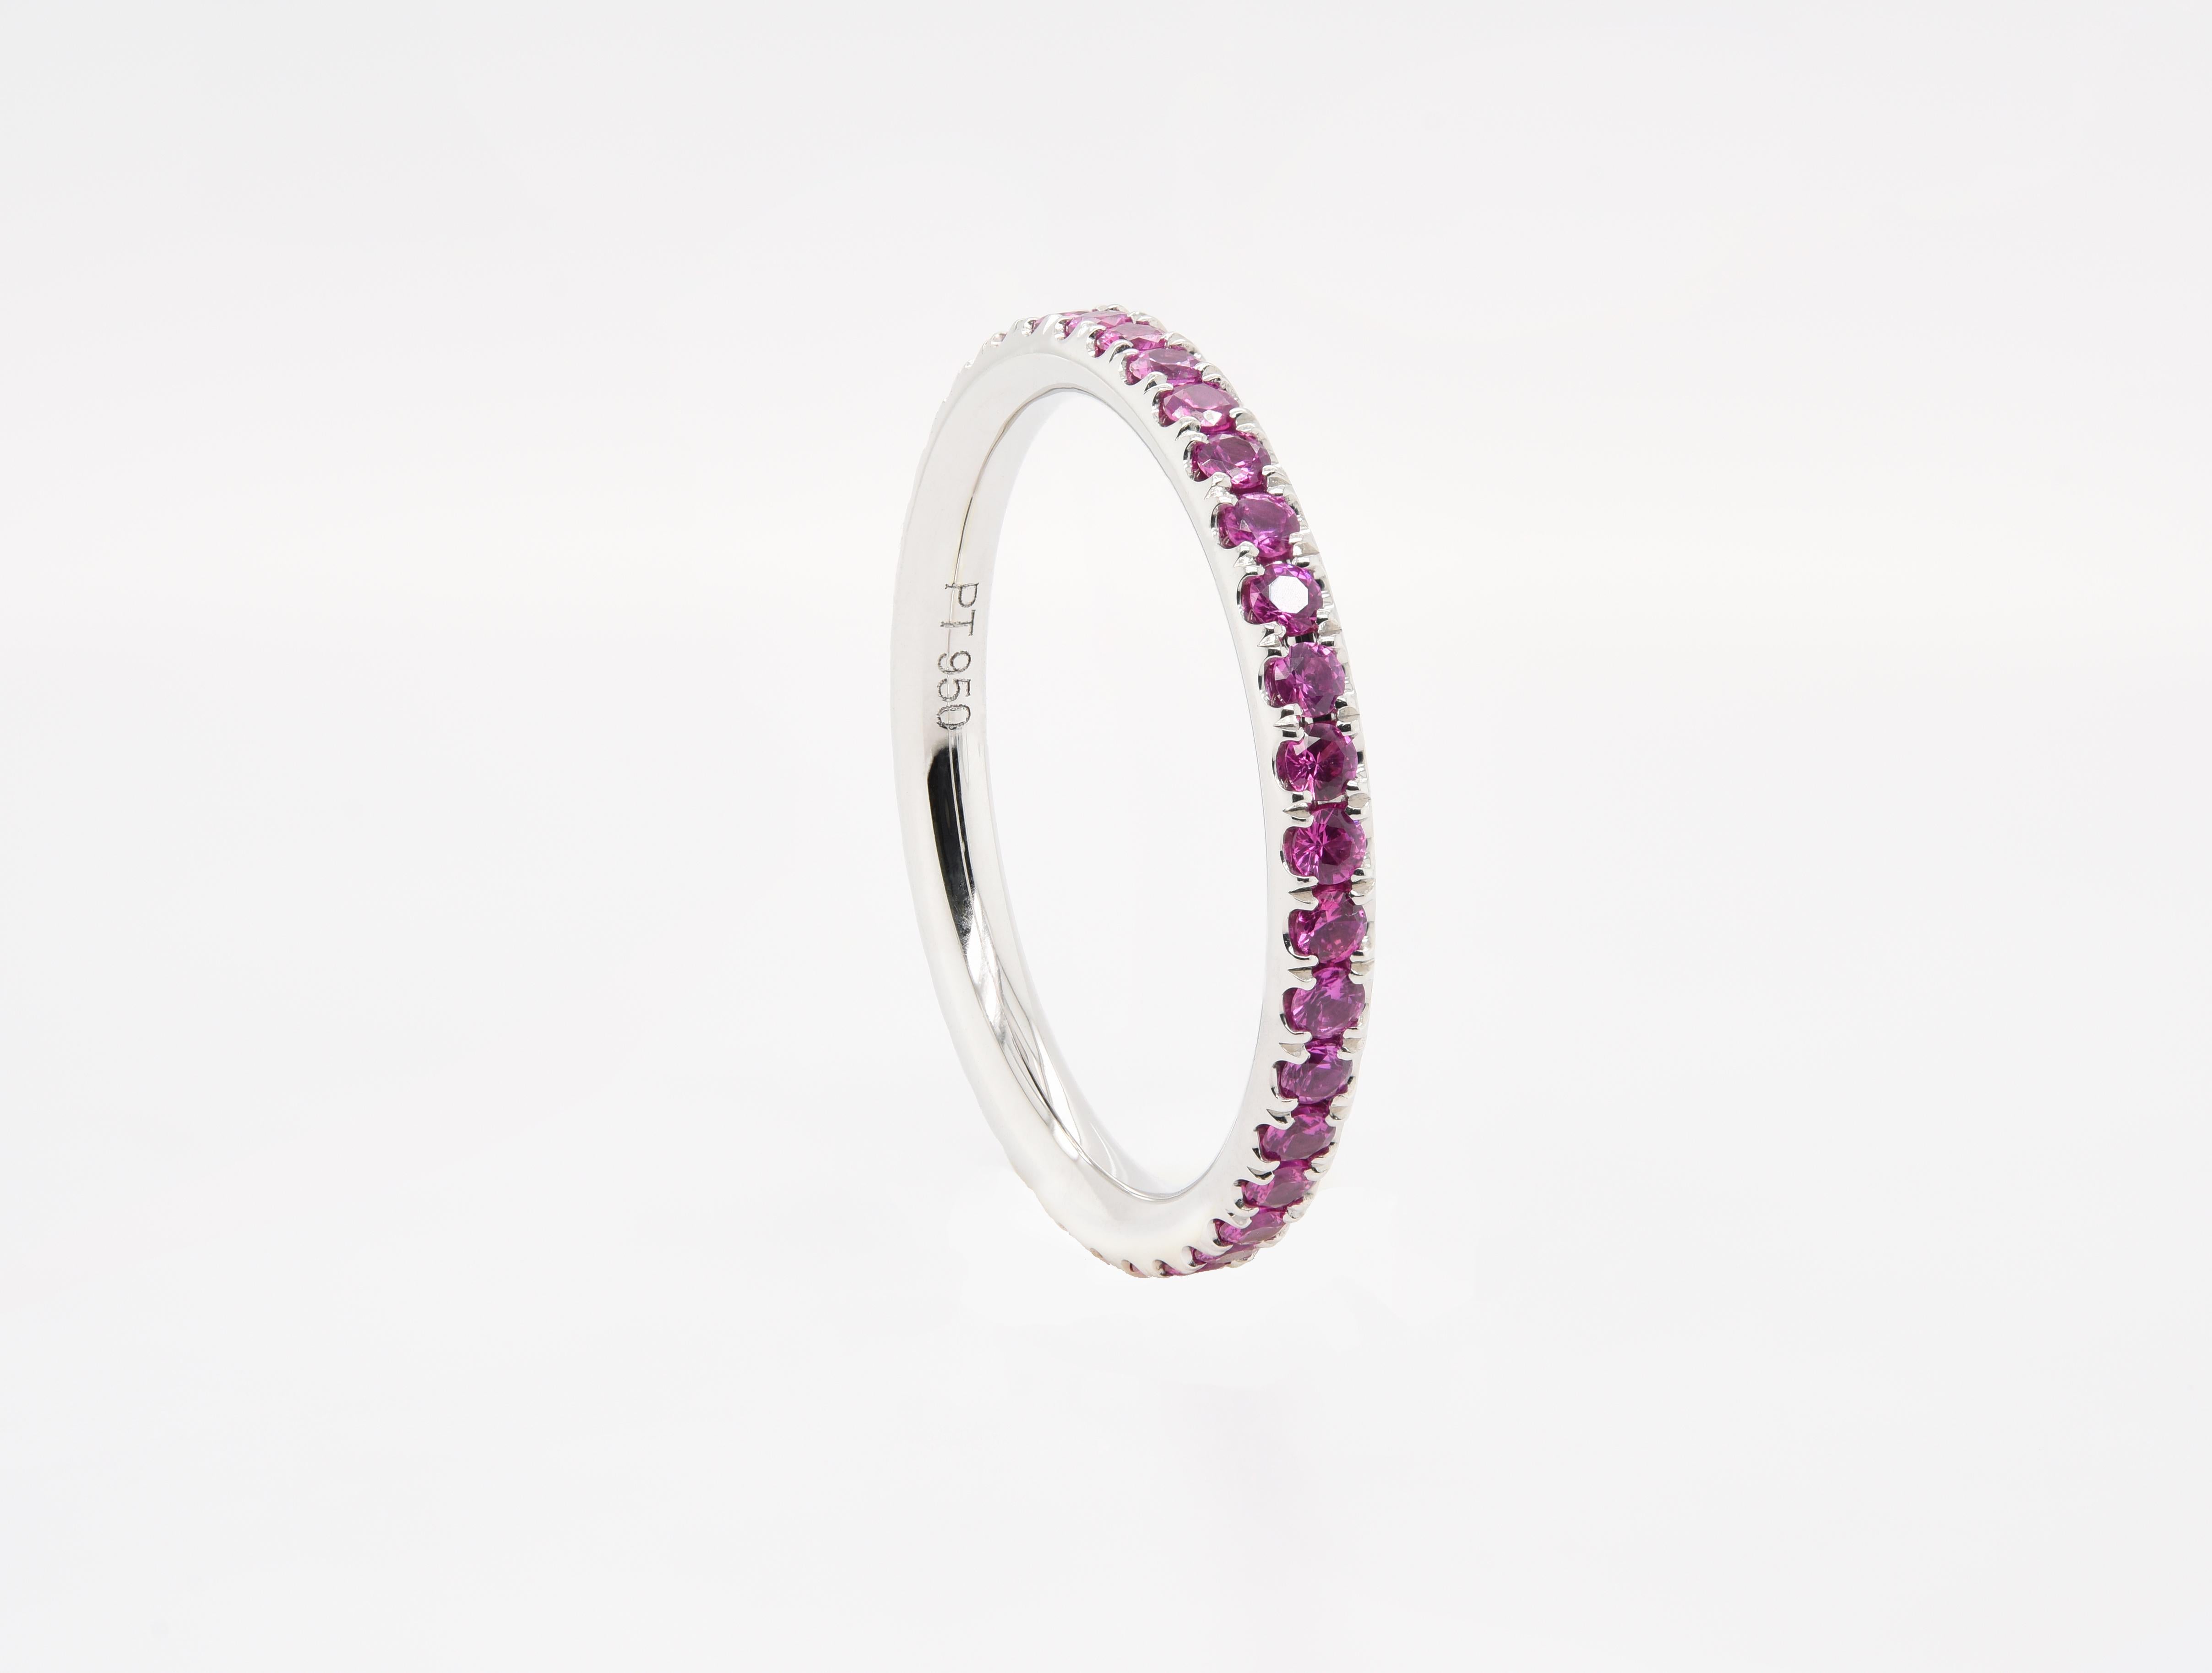 JAG New York Eternity Band with Your Choice of Diamonds and Gemstones 5